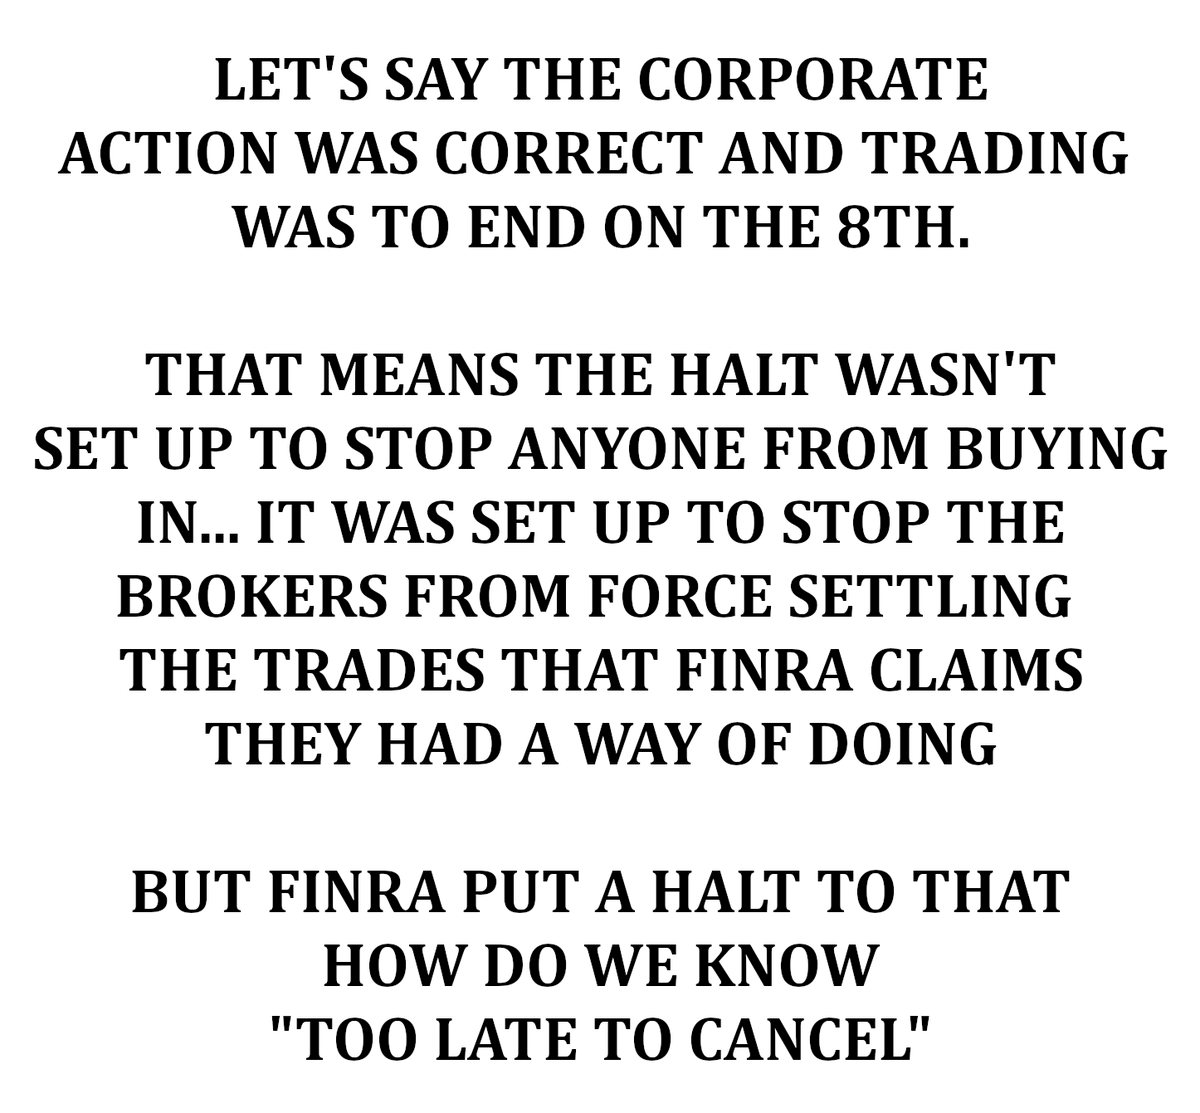 #MMTLP 
FINRA CLAIMS IN THEIR FAQ THAT BROKERS HAD A WAY TO SETTLE THEIR TRADES... 
HOW IF IT WAS HALTED?

THEY WERE TRYING TO BUT THEY SAY 'SORRY FOLKS WE TRIED TO CLOSE THEM OUT BUT IT GOT DELETED....SO IT'S TOO LATE TO CANCEL'

JUST ANOTHER BREADCRUMB THEY LEFT